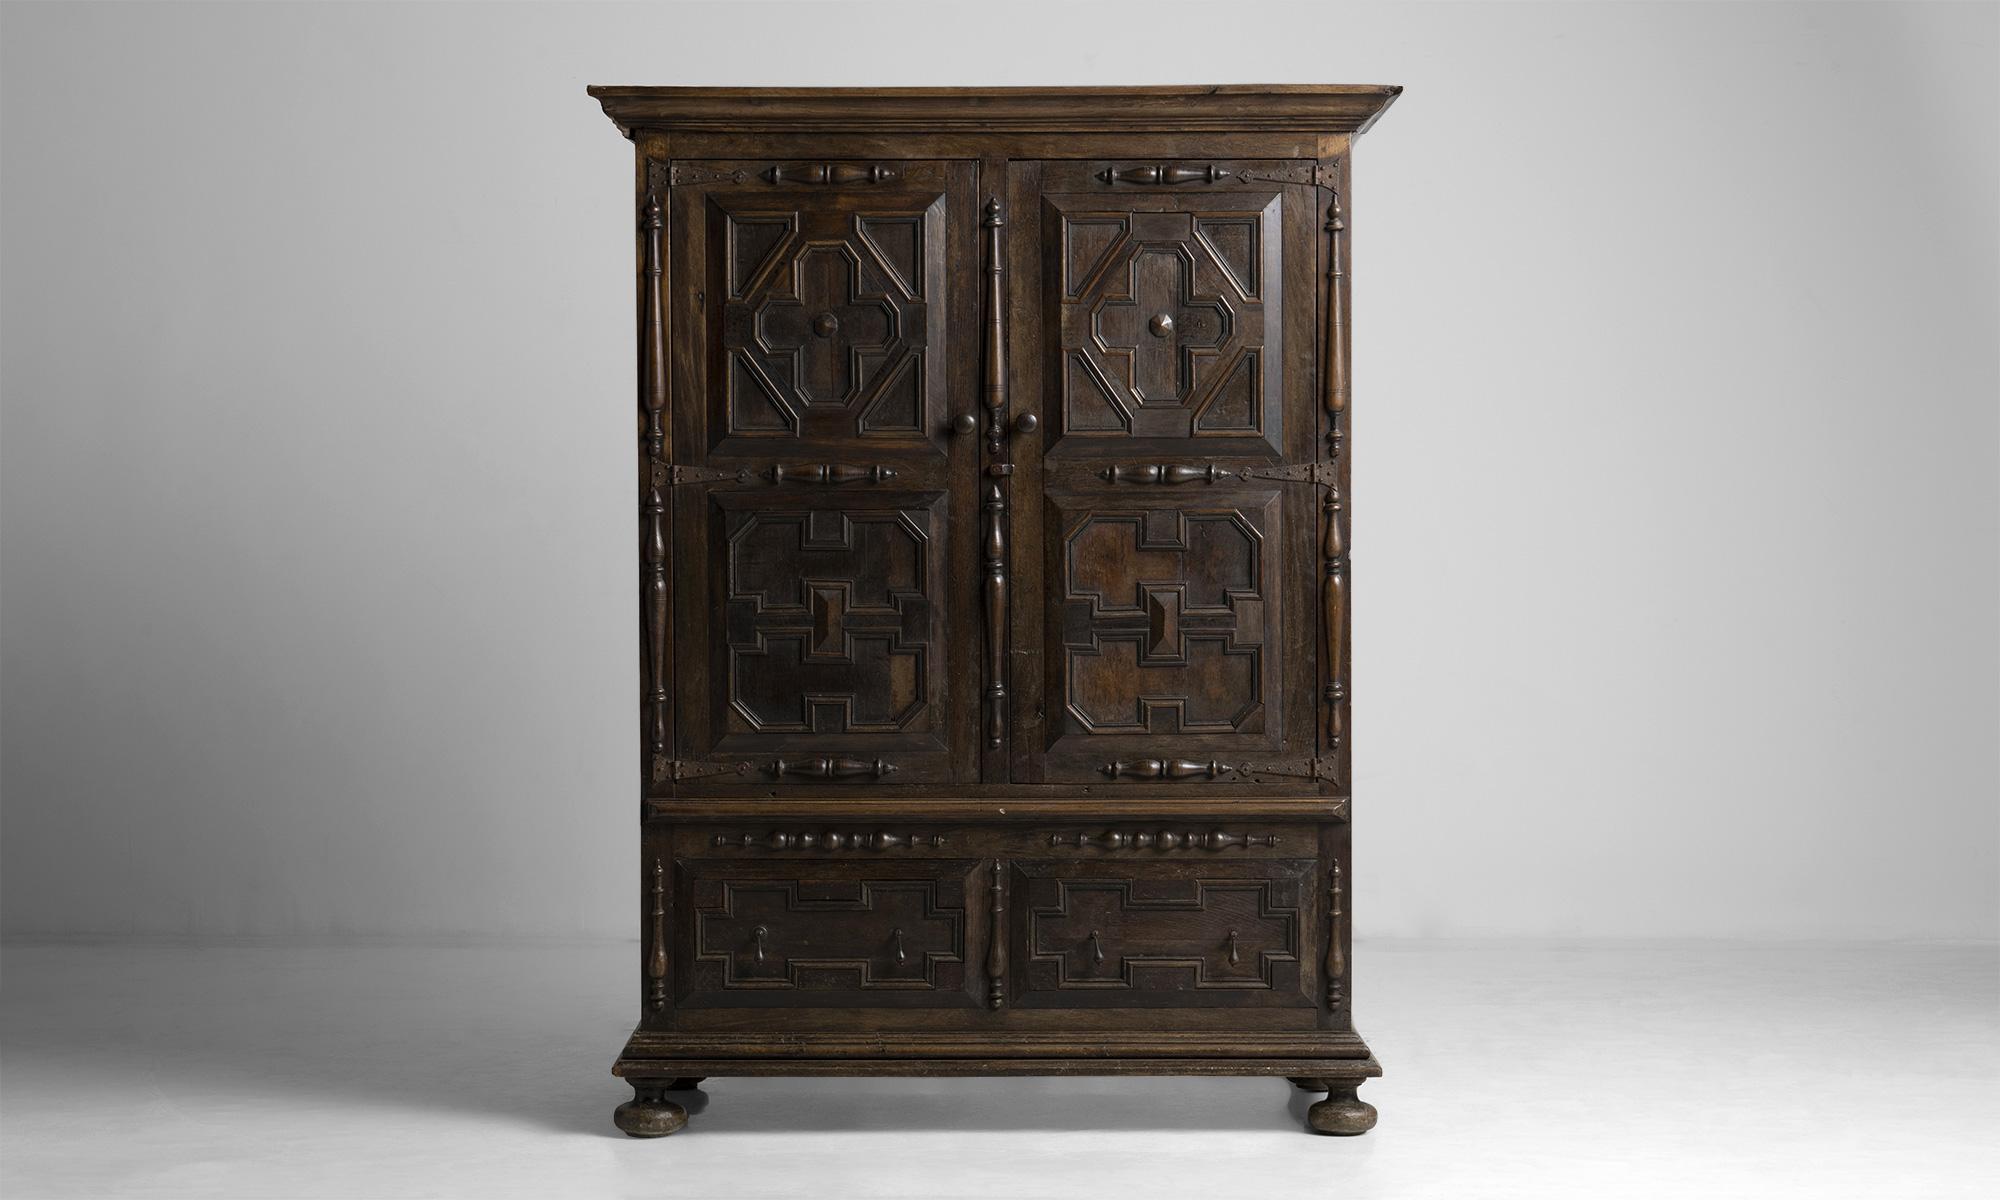 Oak Livery cupboard

England circa 1830

Beautifully constructed cabinet with geometric pattern.

Measures: 58.75” L x 28.5” D x 76.25” H.